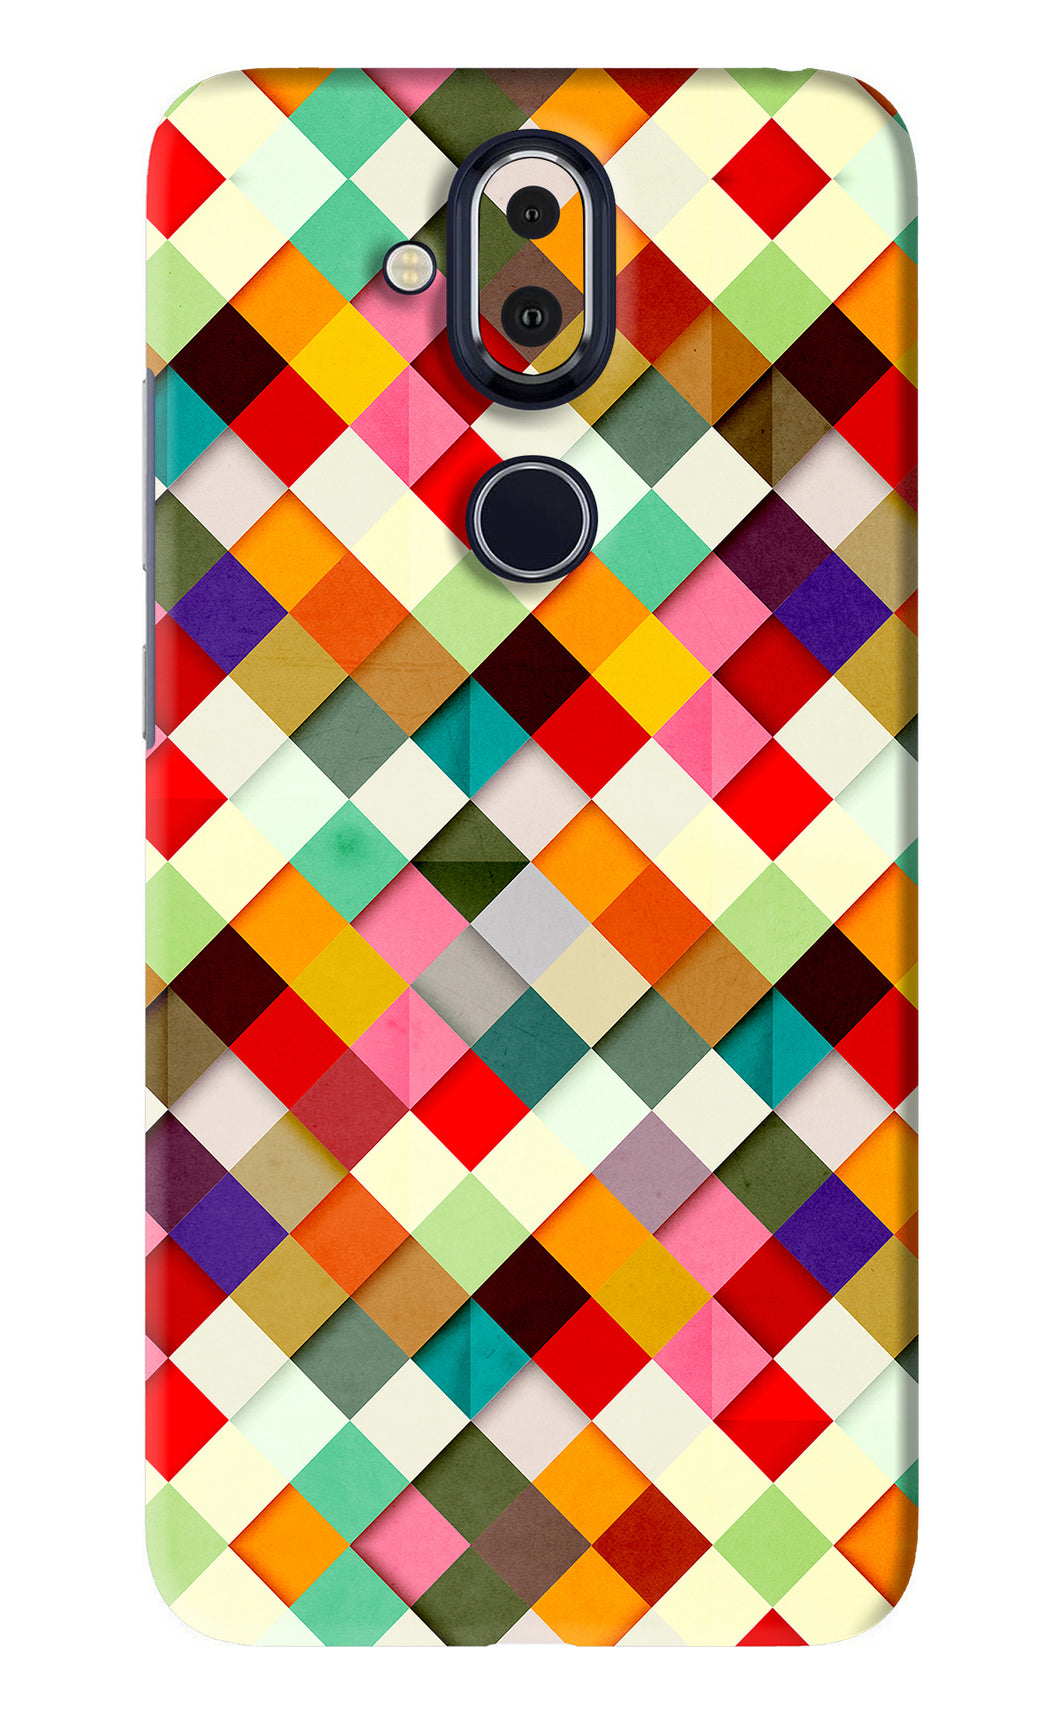 Geometric Abstract Colorful Nokia 8 Back Skin Wrap